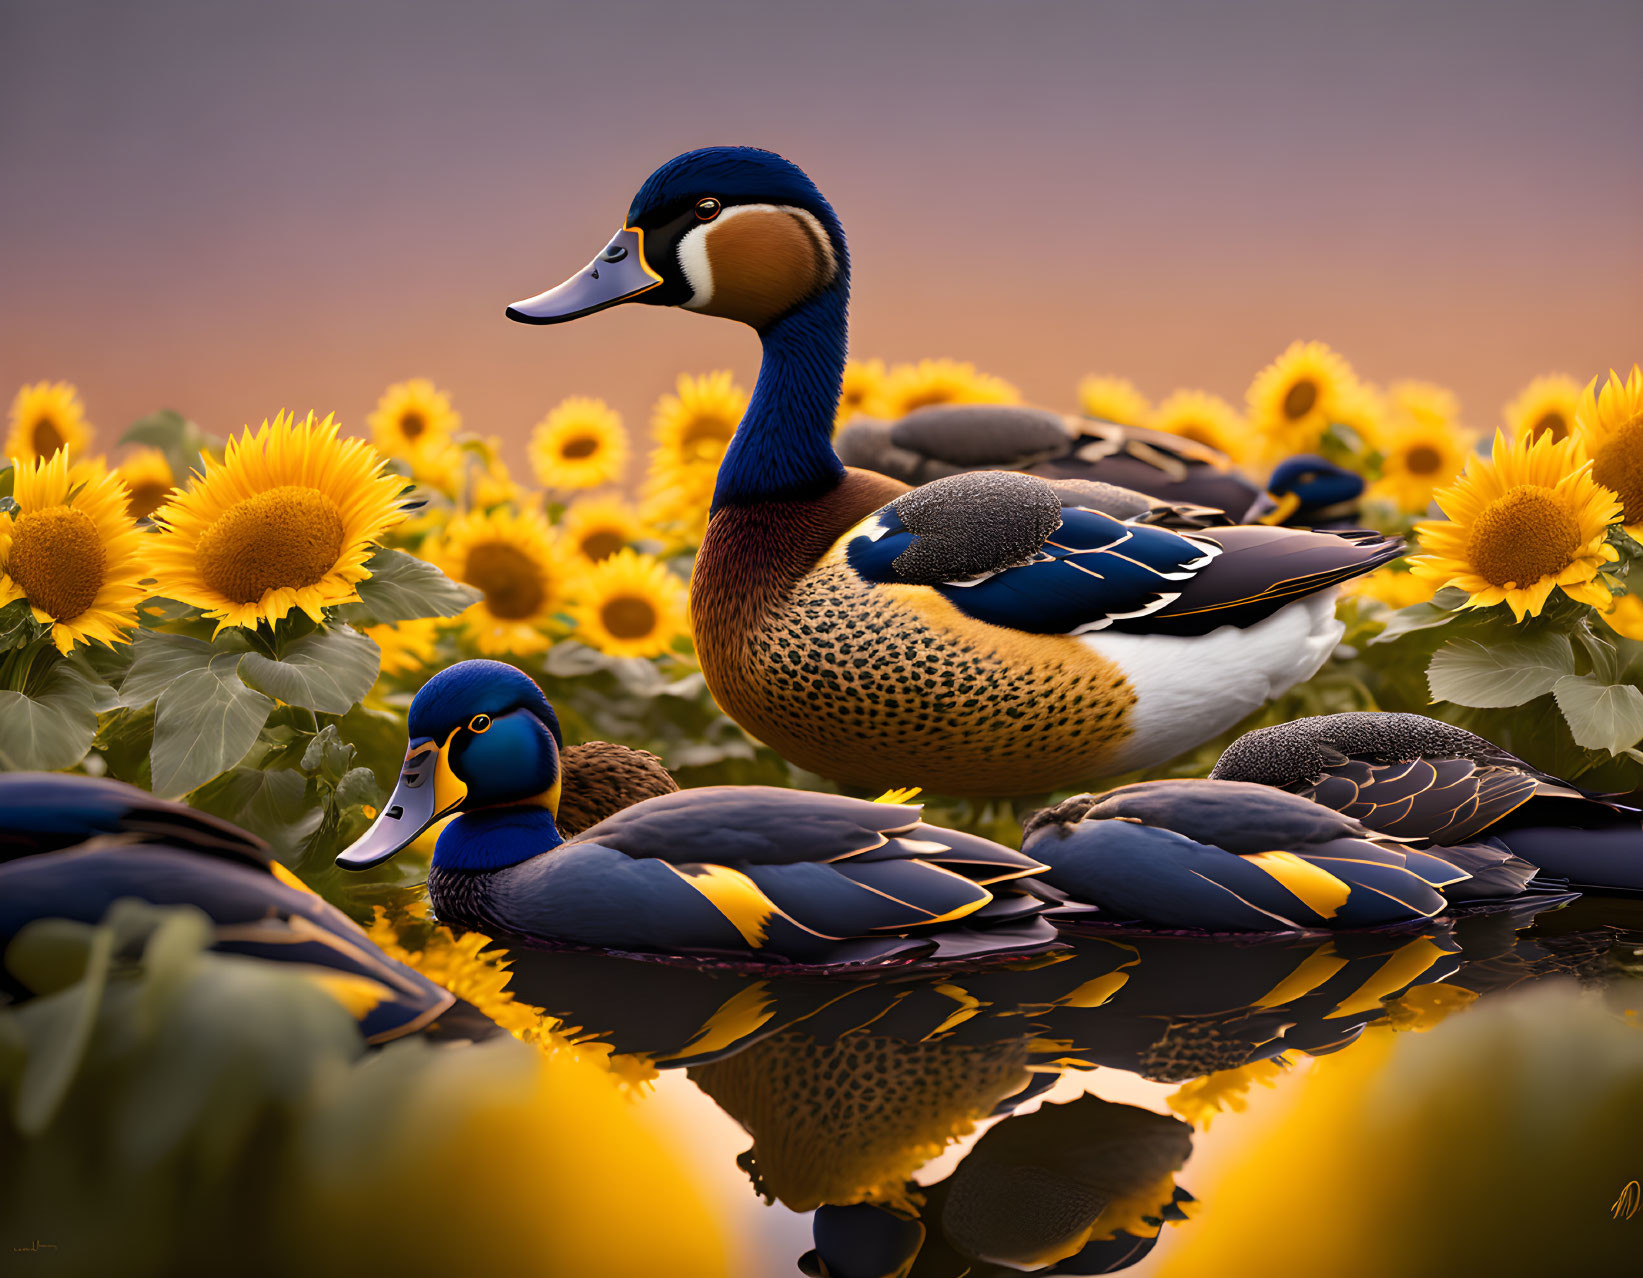 Tranquil pond scene with ducks and sunflowers at sunset